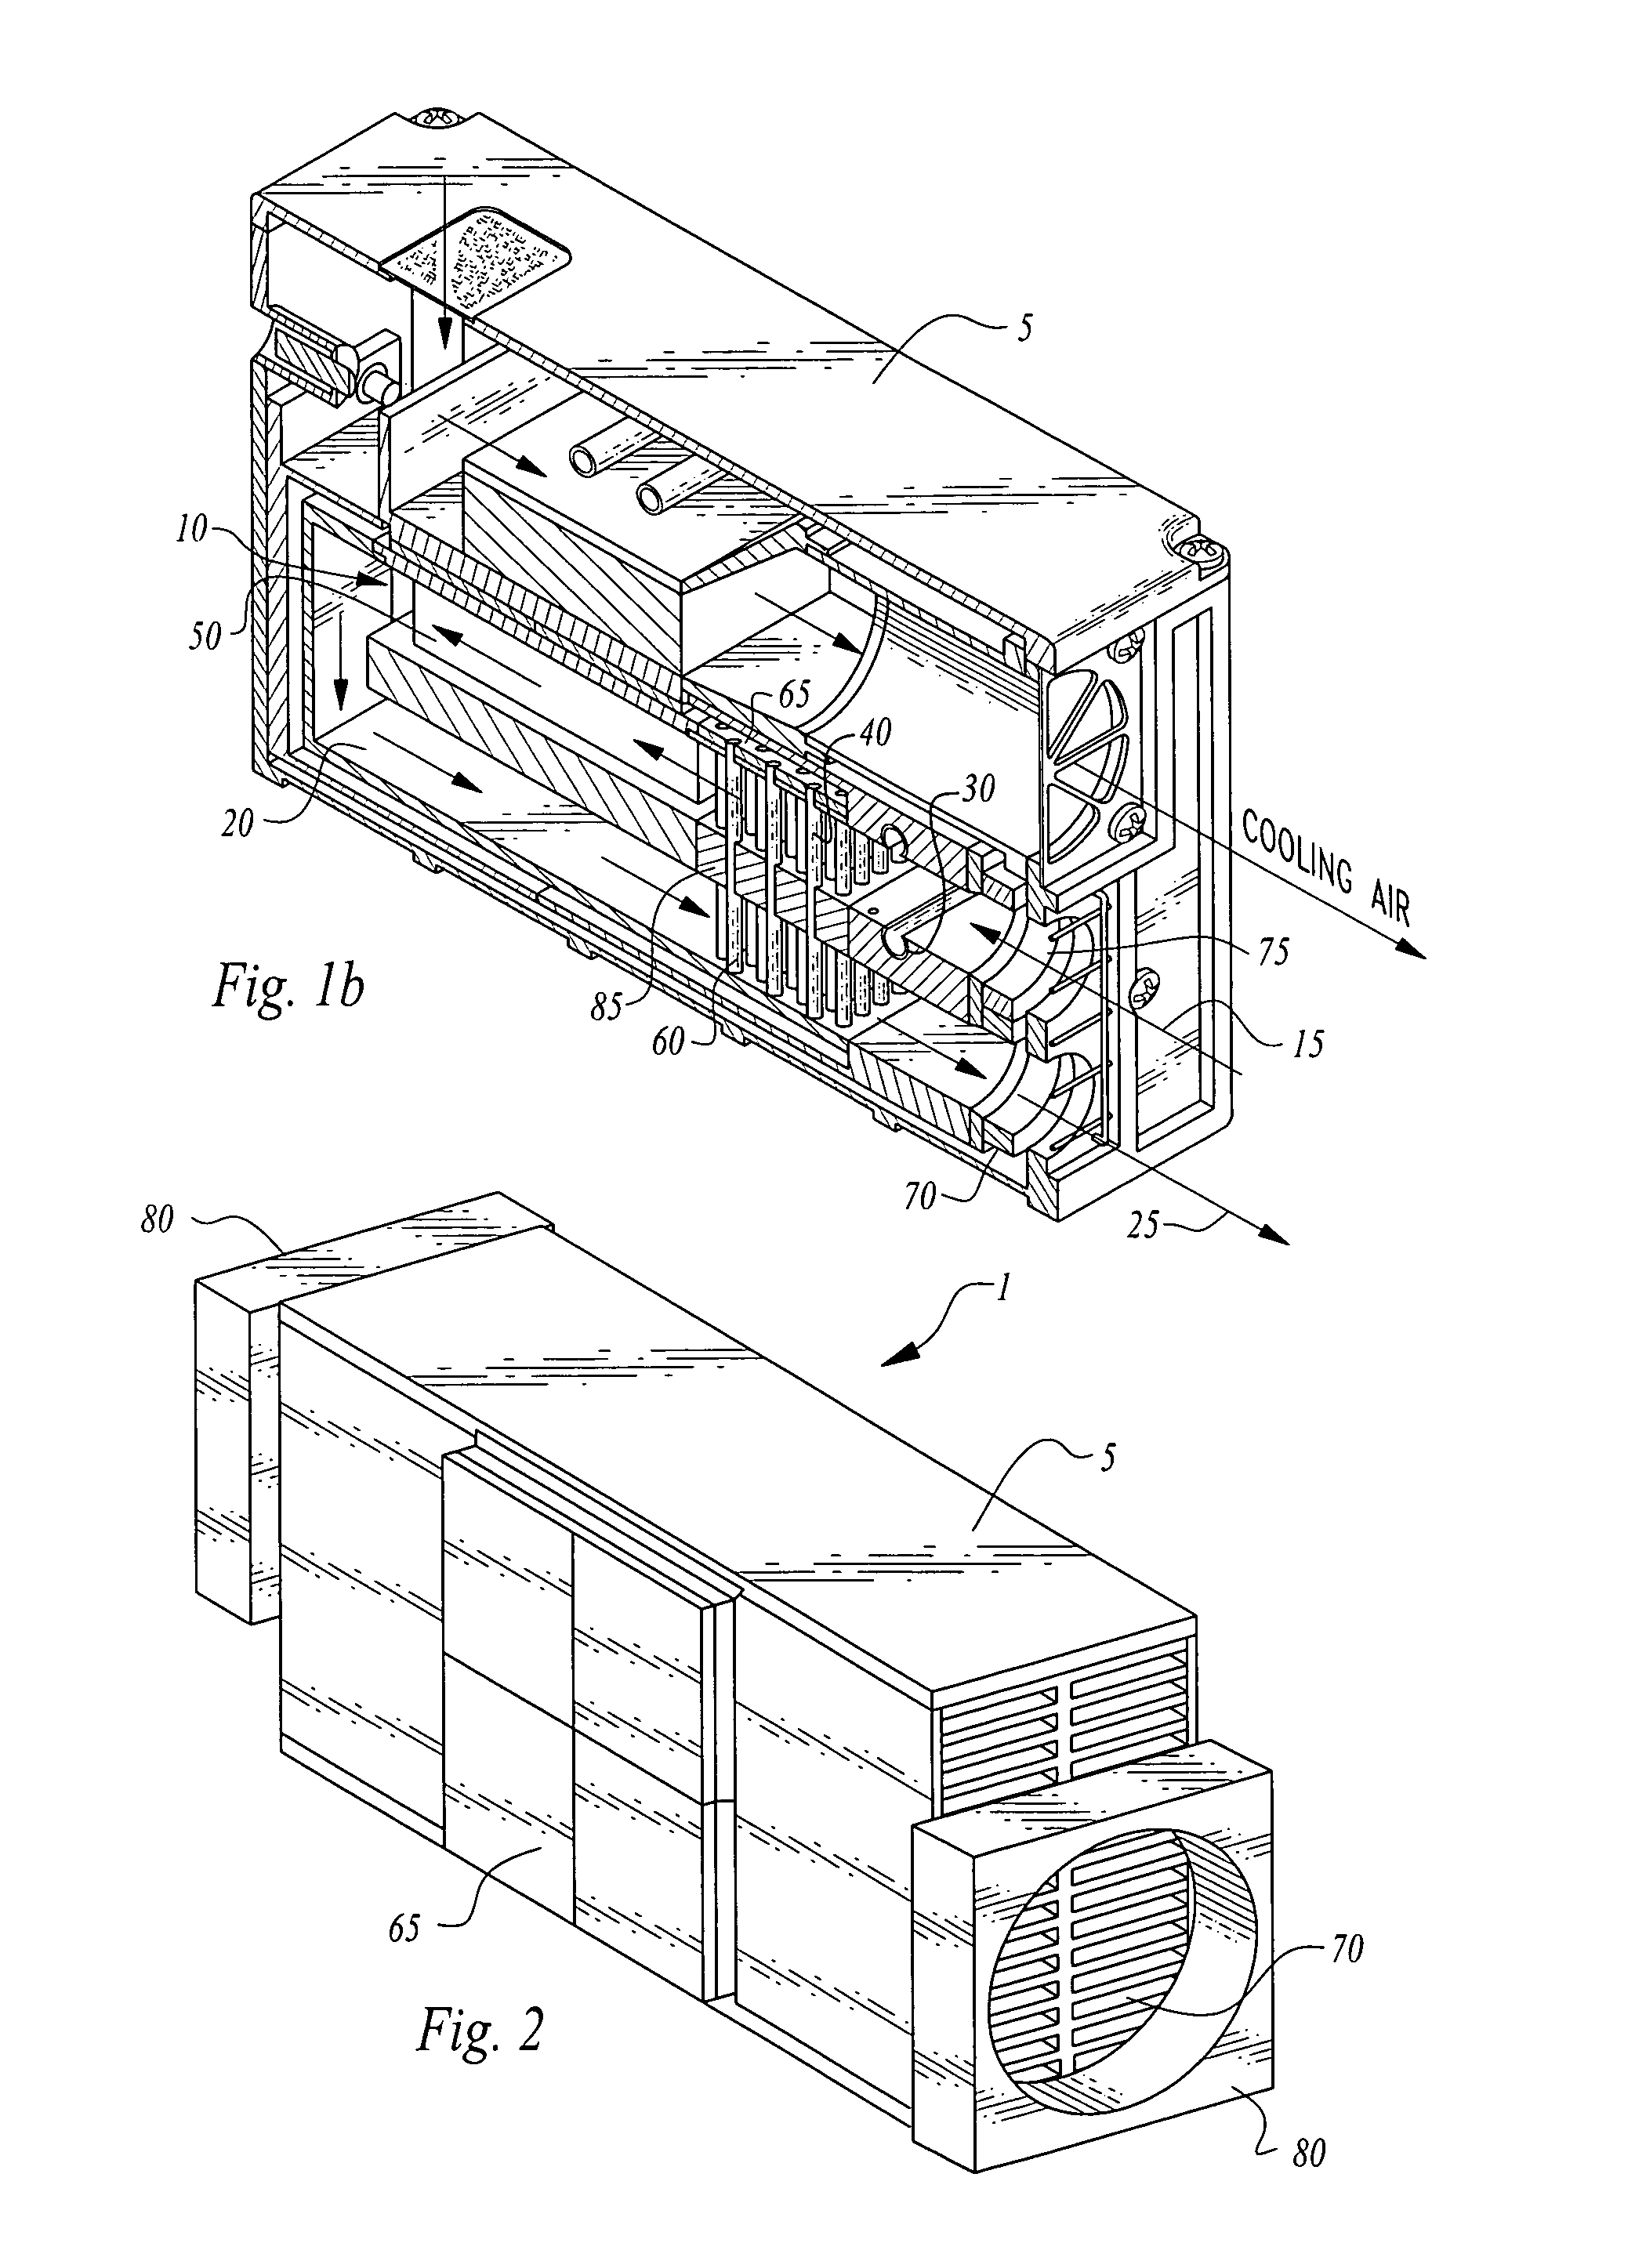 Micro-combustion power system with dual path counter-flow system